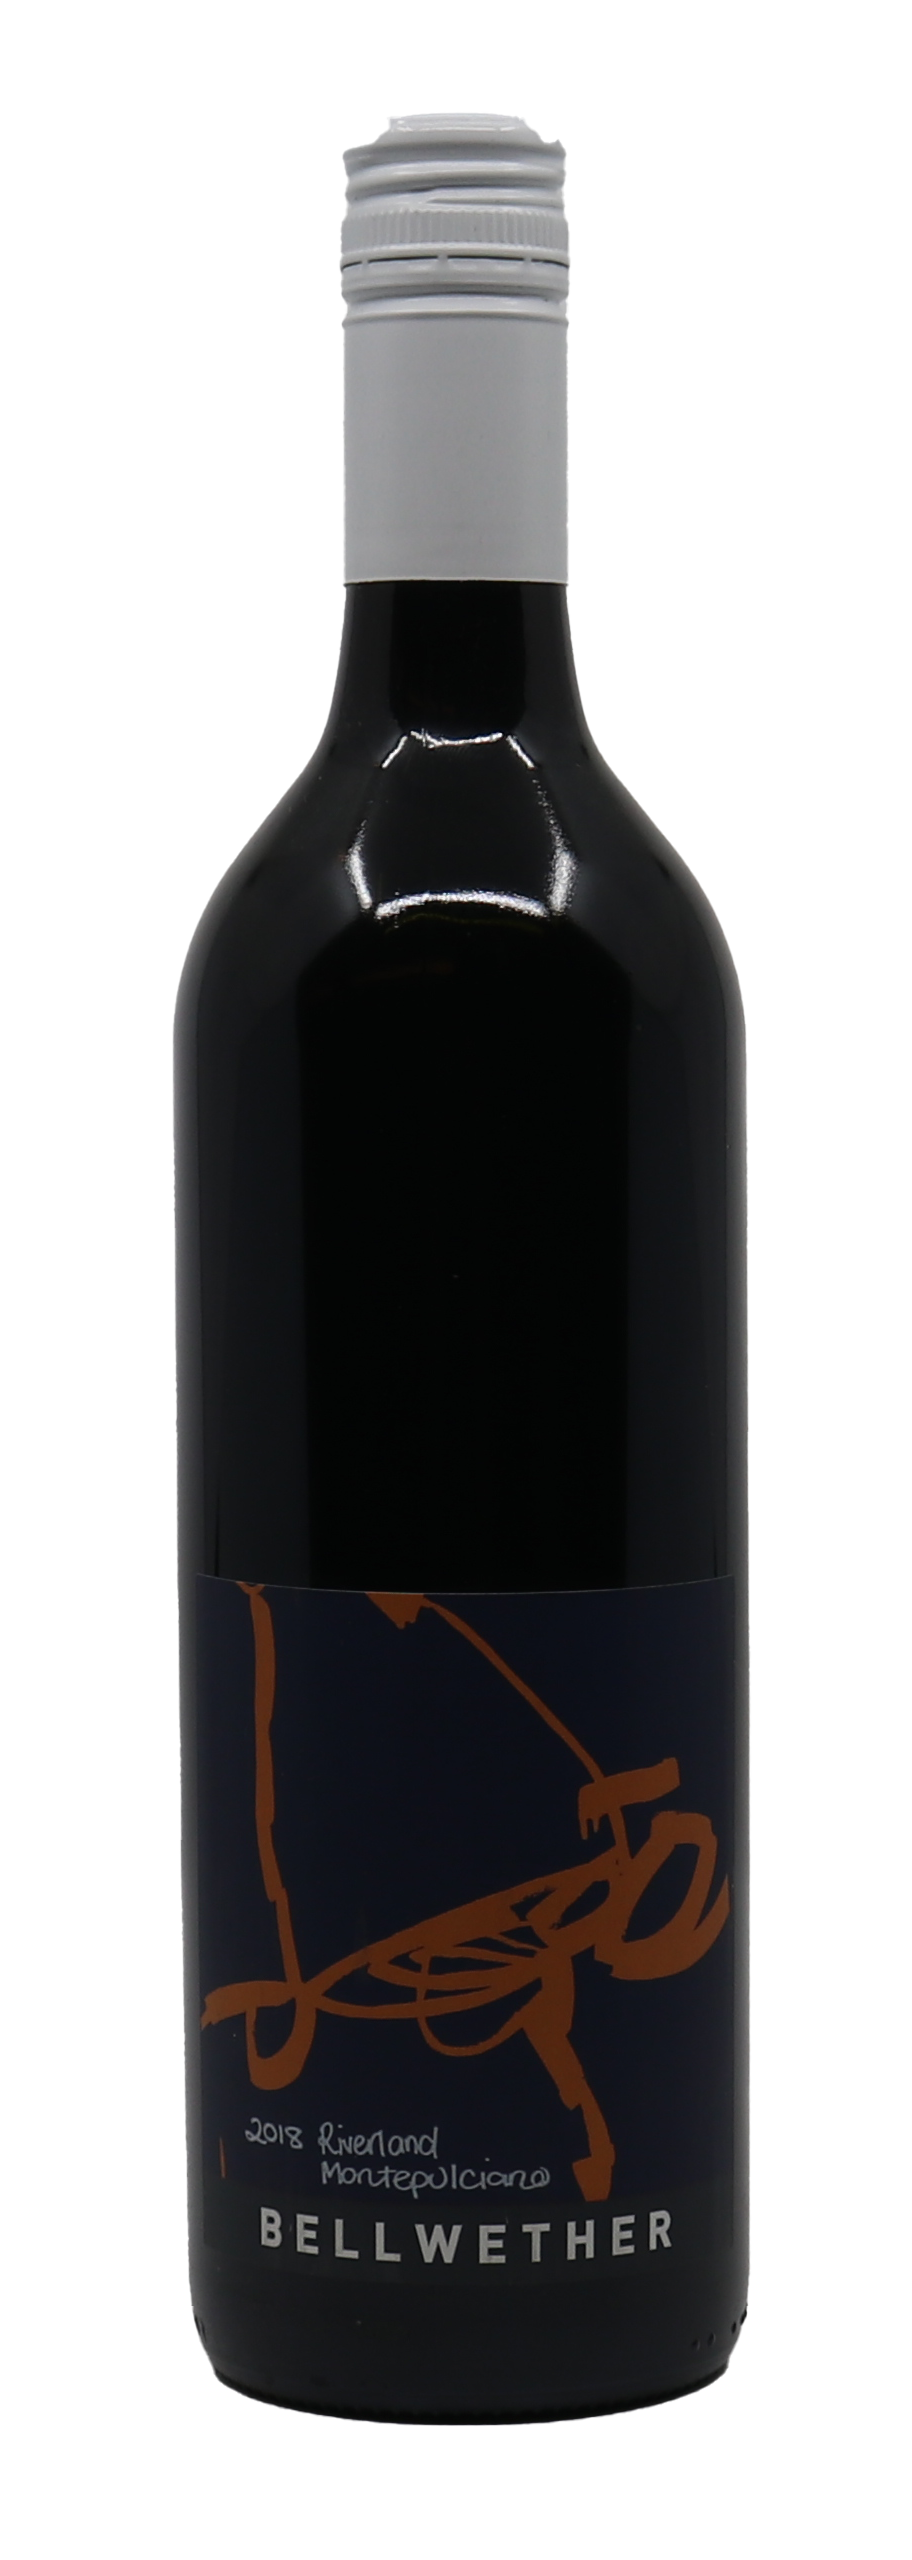 Bellwether Ant Series Montepulciano 2018